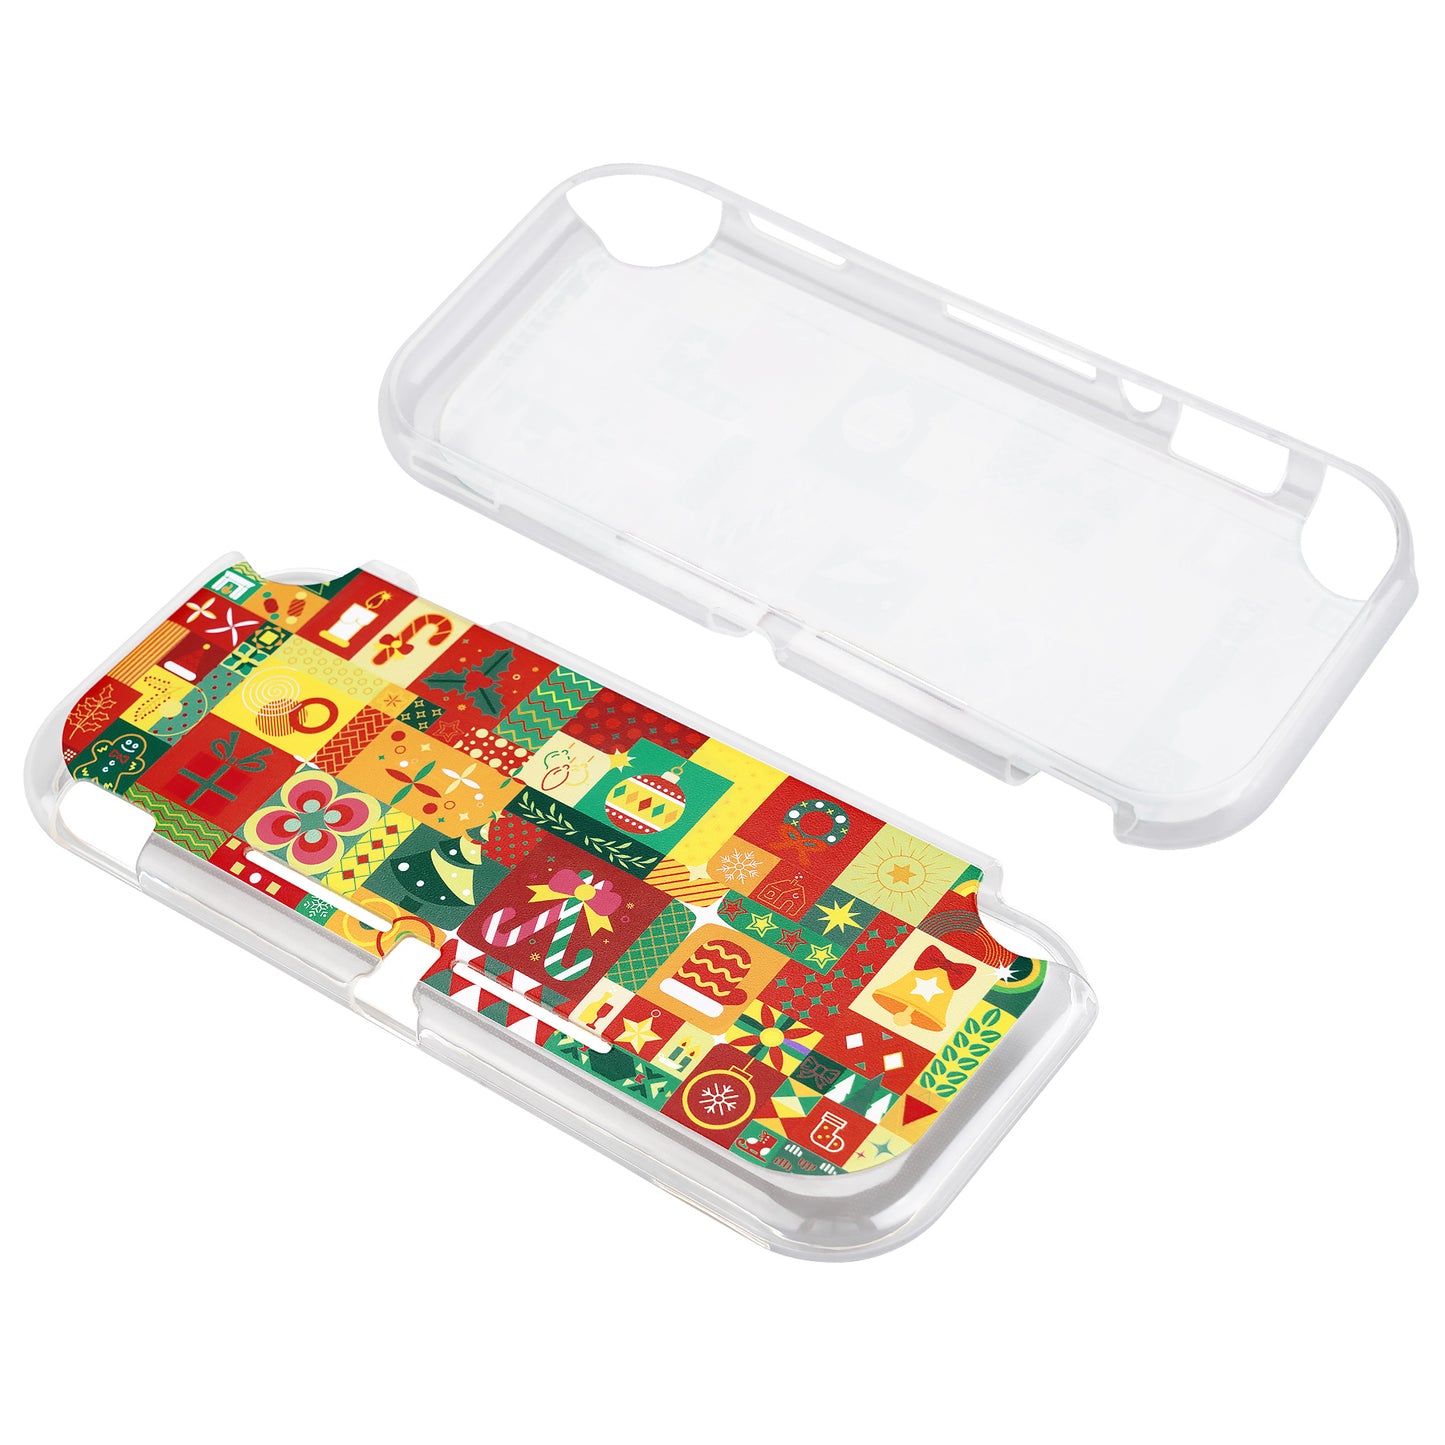 PlayVital Christmas Wrap Custom Protective Case for NS Switch Lite, Soft TPU Slim Case Cover for NS Switch Lite - LTU6033